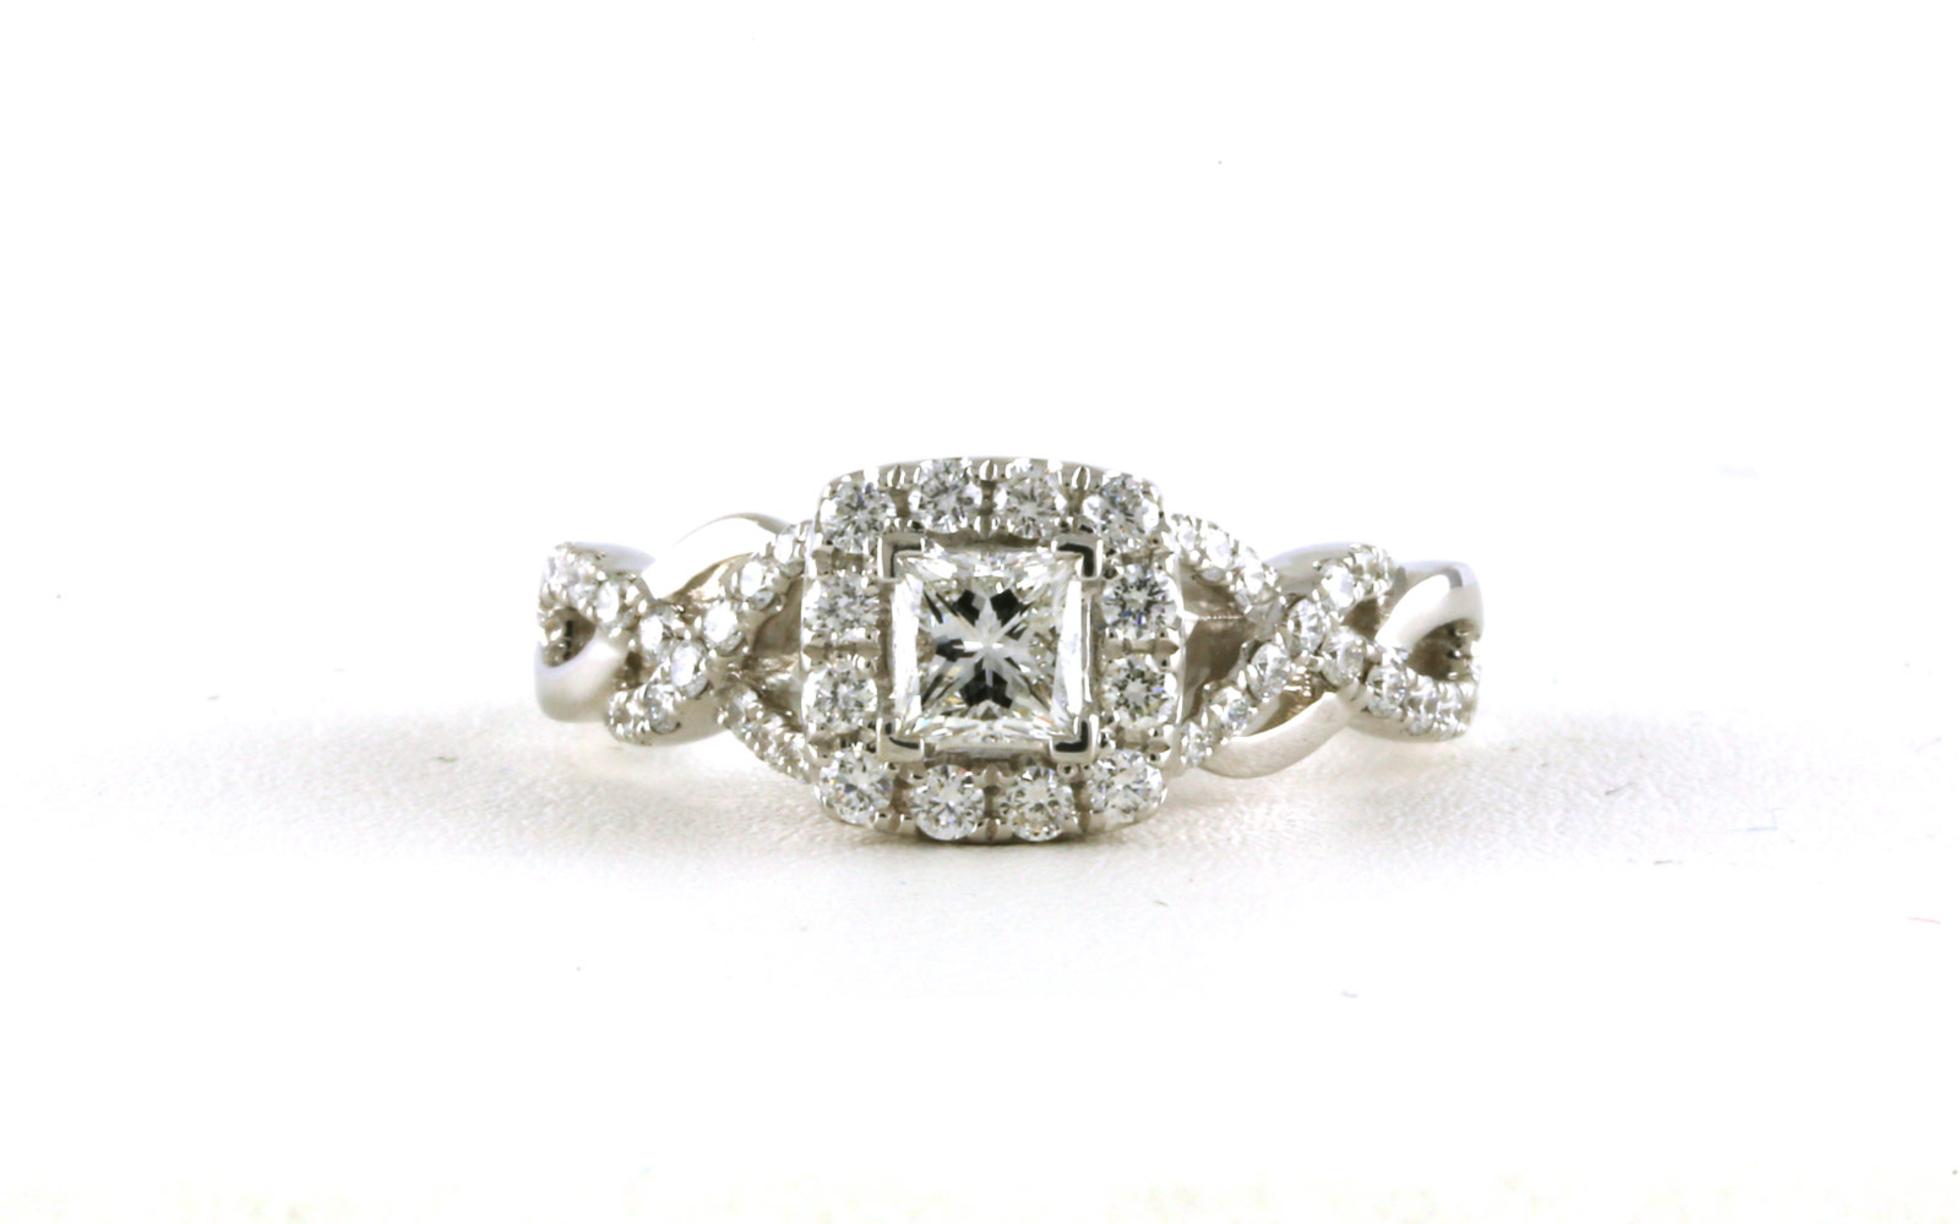 Woven Halo Princess-cut Diamond Engagement Ring in White Gold